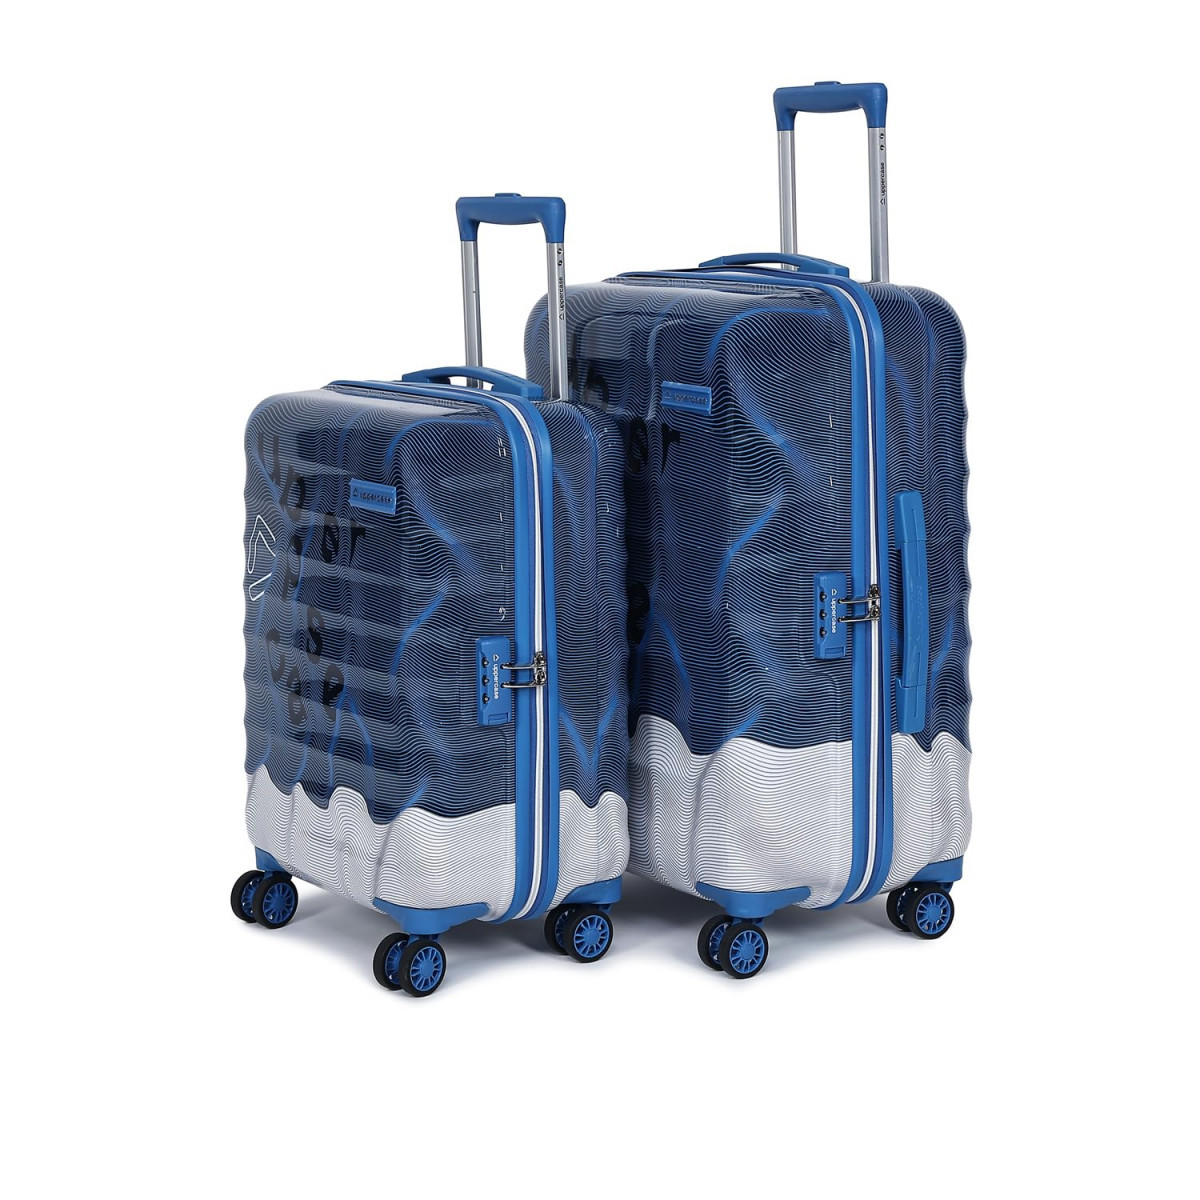 uppercase Ripple Trolley Bag Set Of 2 ML Check-In Trolley Bag Hardsided Polycarbonate Printed Luggage 8 Wheel Suitcase Unisex 2000 Days Warranty Blue 31 X 53 X 755 Cm Spinner